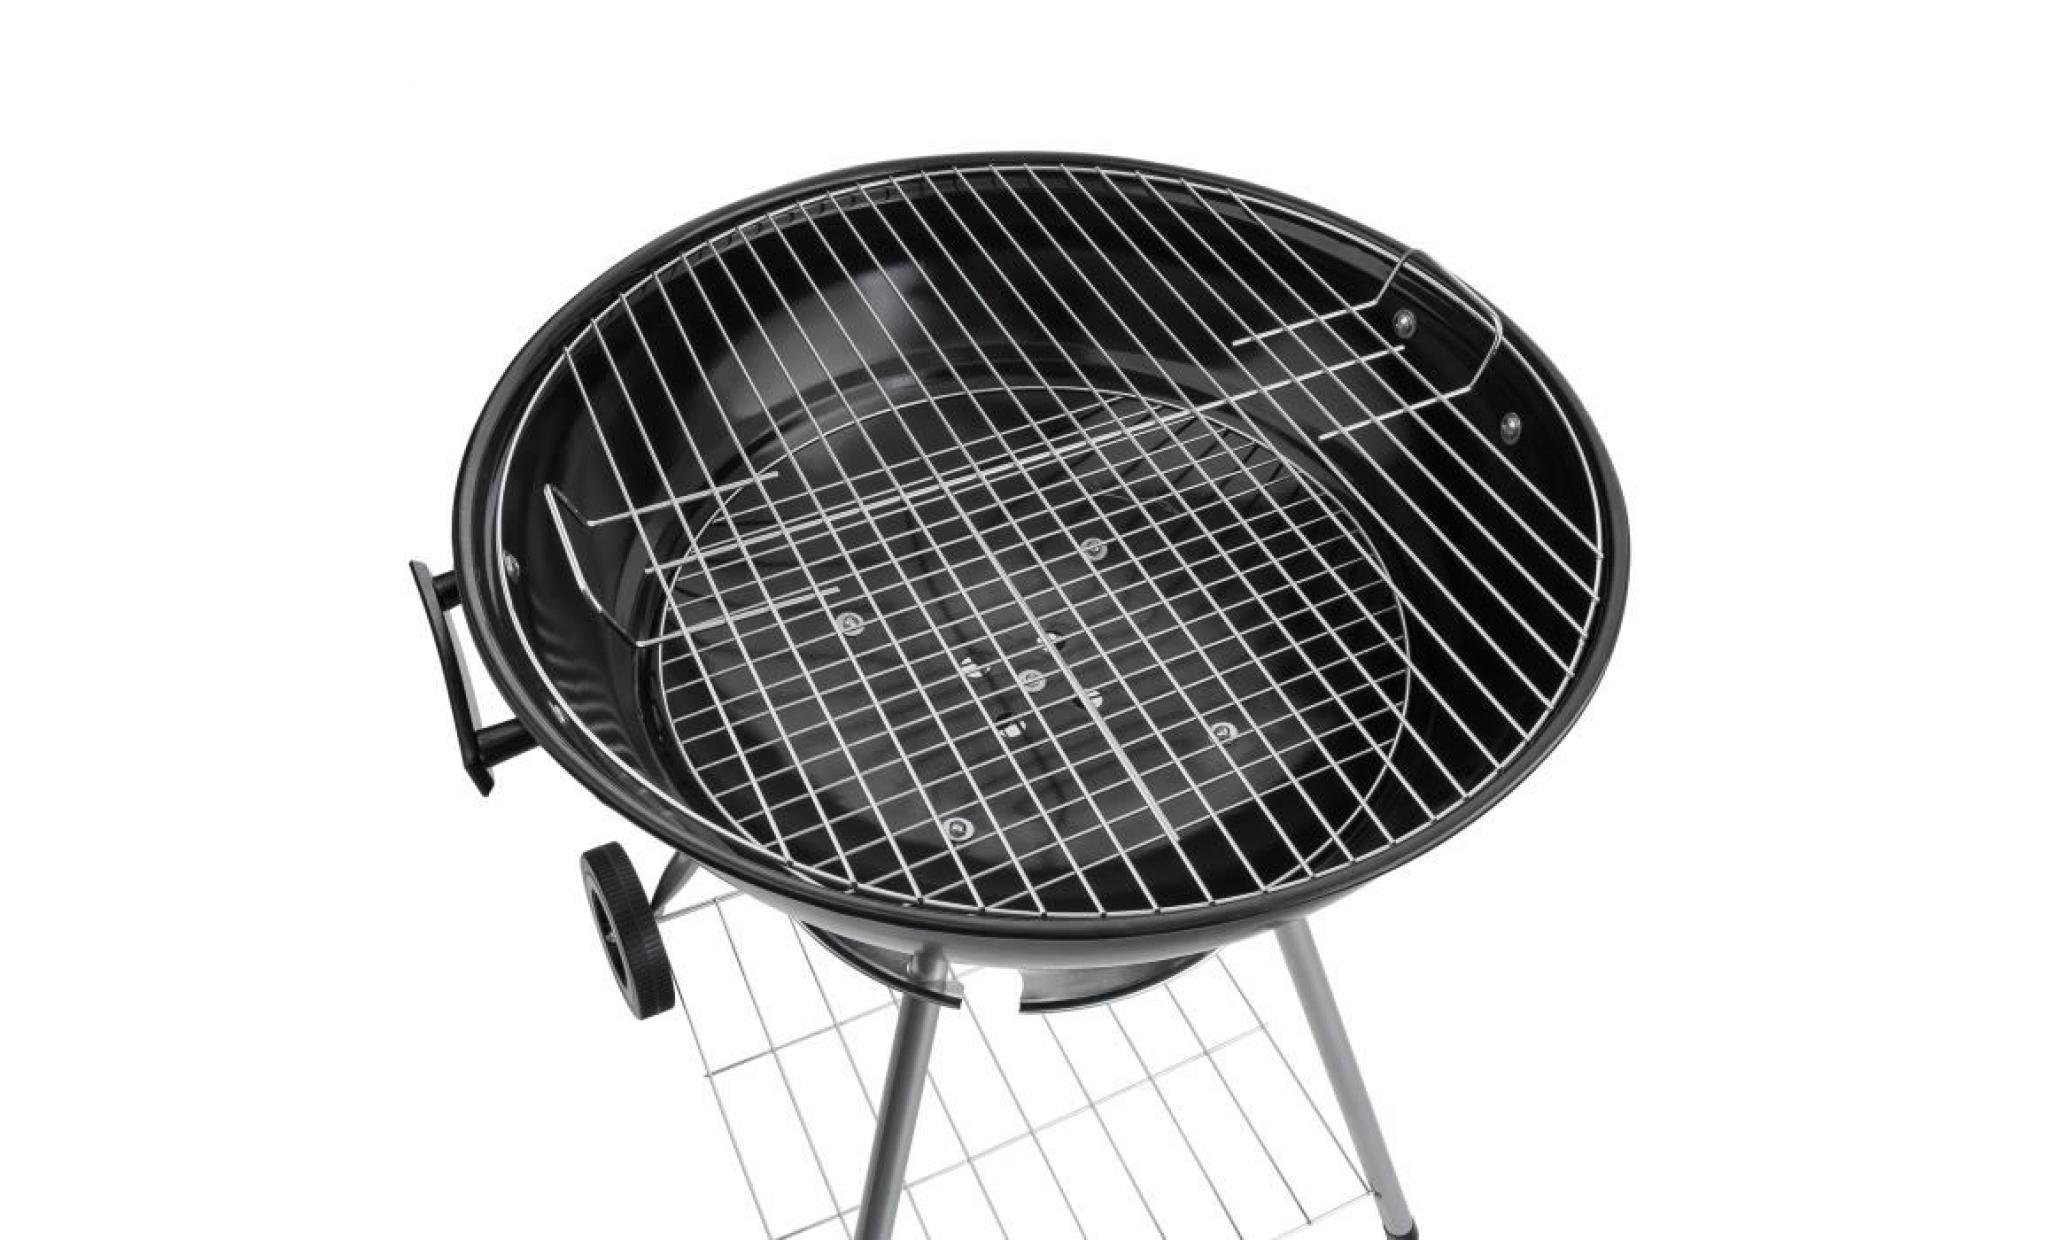 arebos barbecue boule barbecue grille bbq rond mobile acier inoxydable 46 cm pas cher